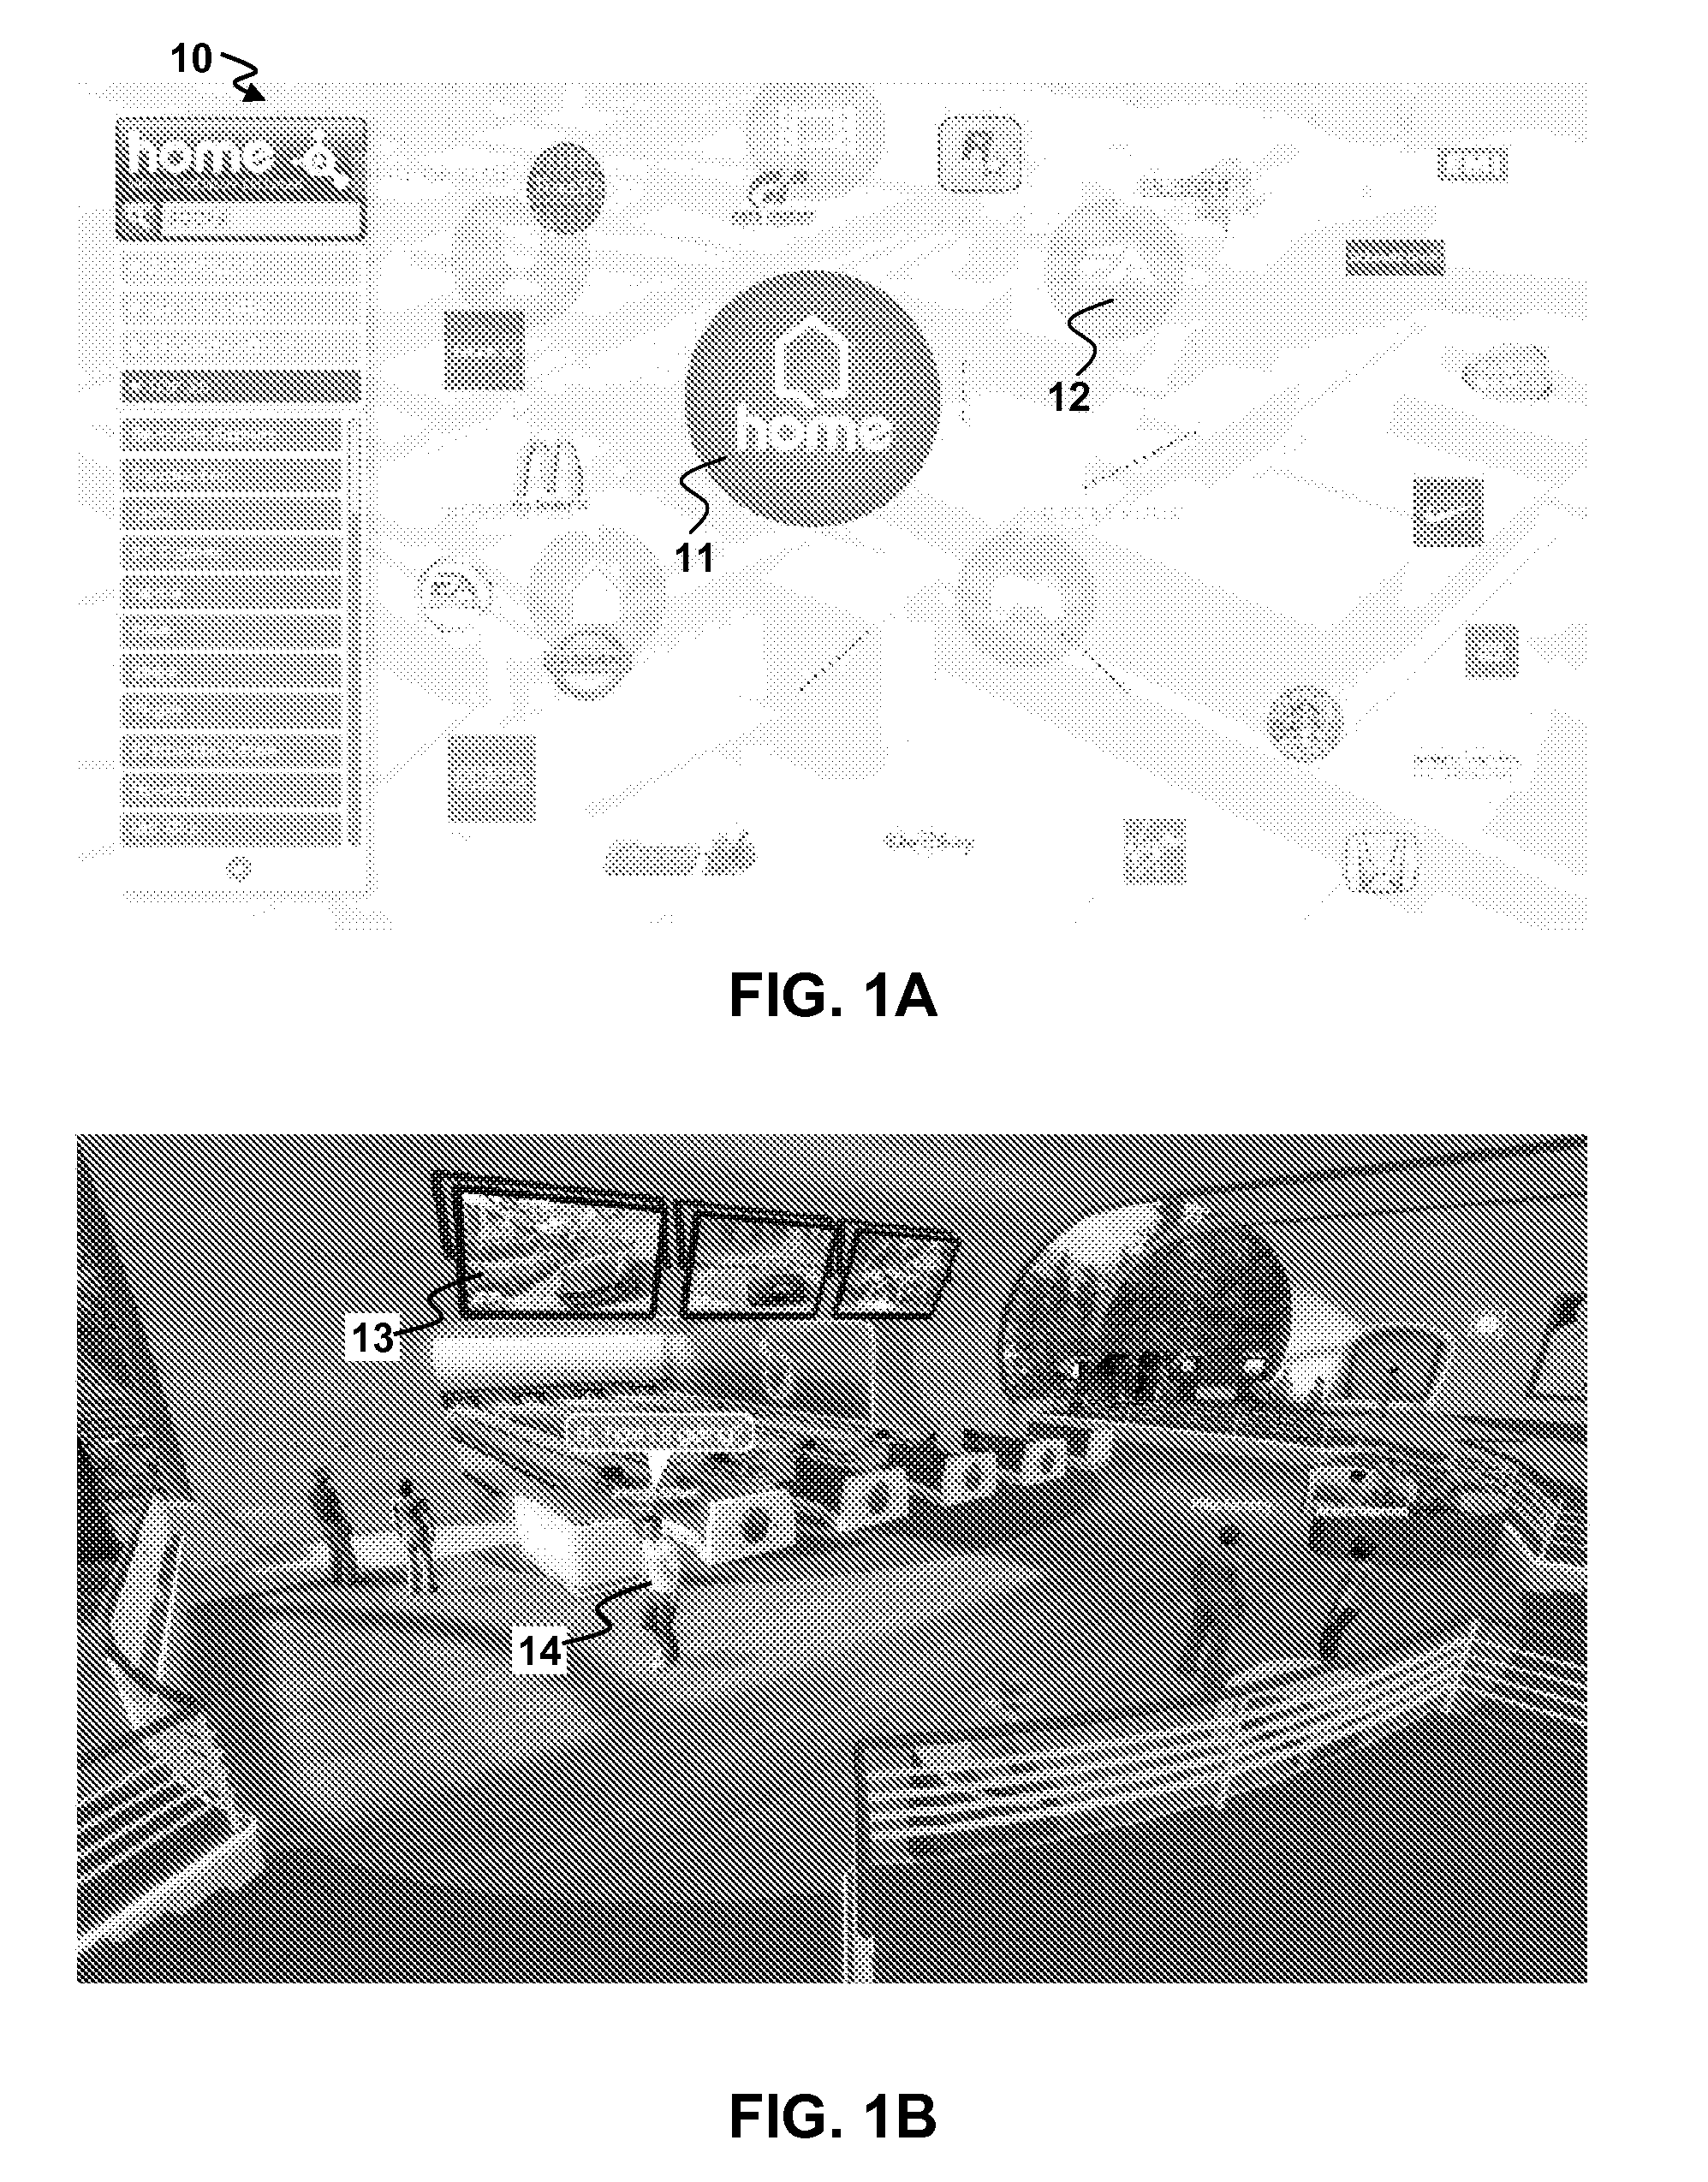 System and method for routing communications among real and virtual communication devices